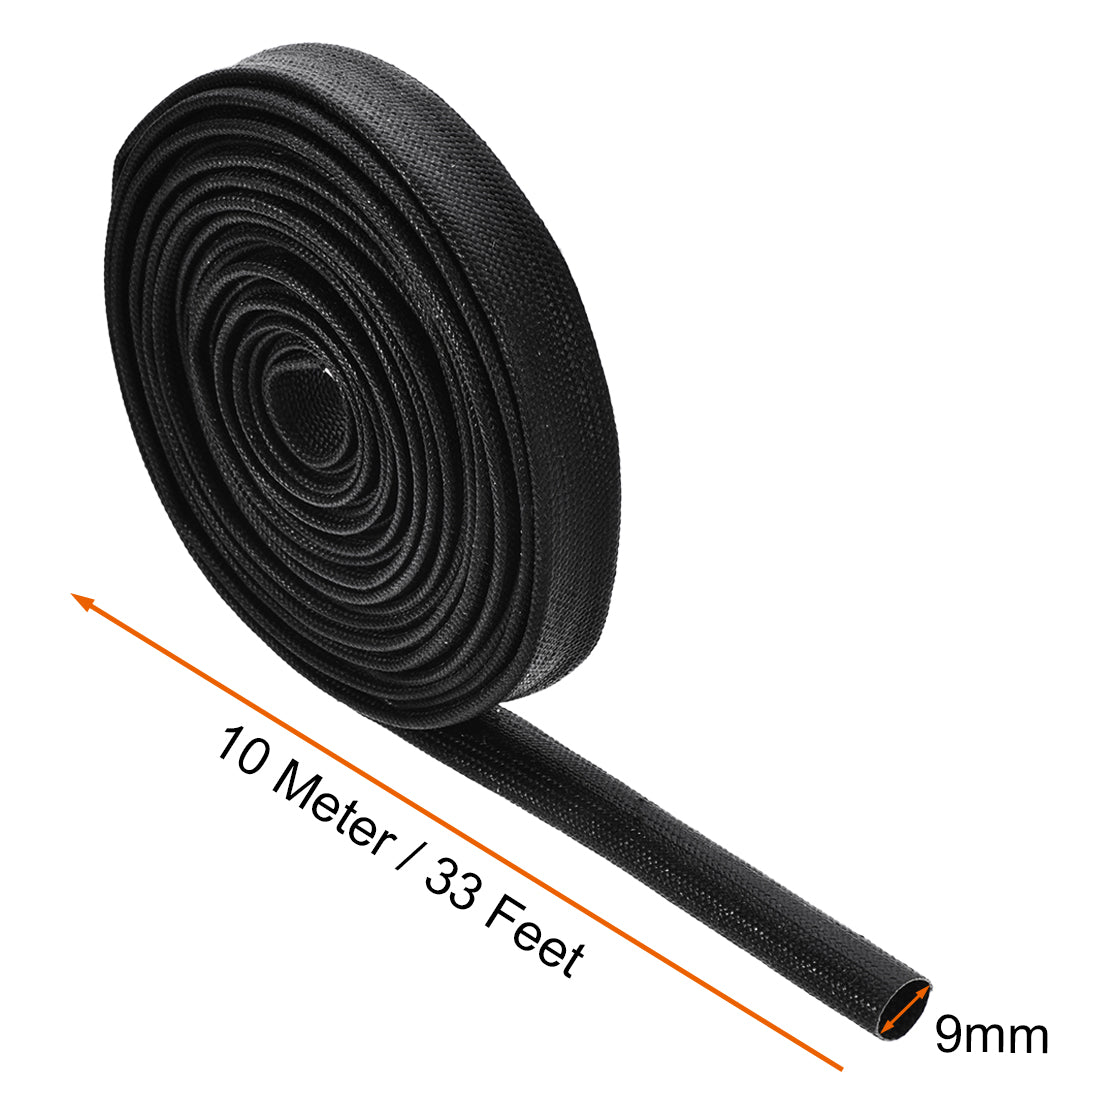 uxcell Uxcell Insulation Cable Protector, 33Ft-9mm High TEMP Silicone Fiberglass Sleeve Black